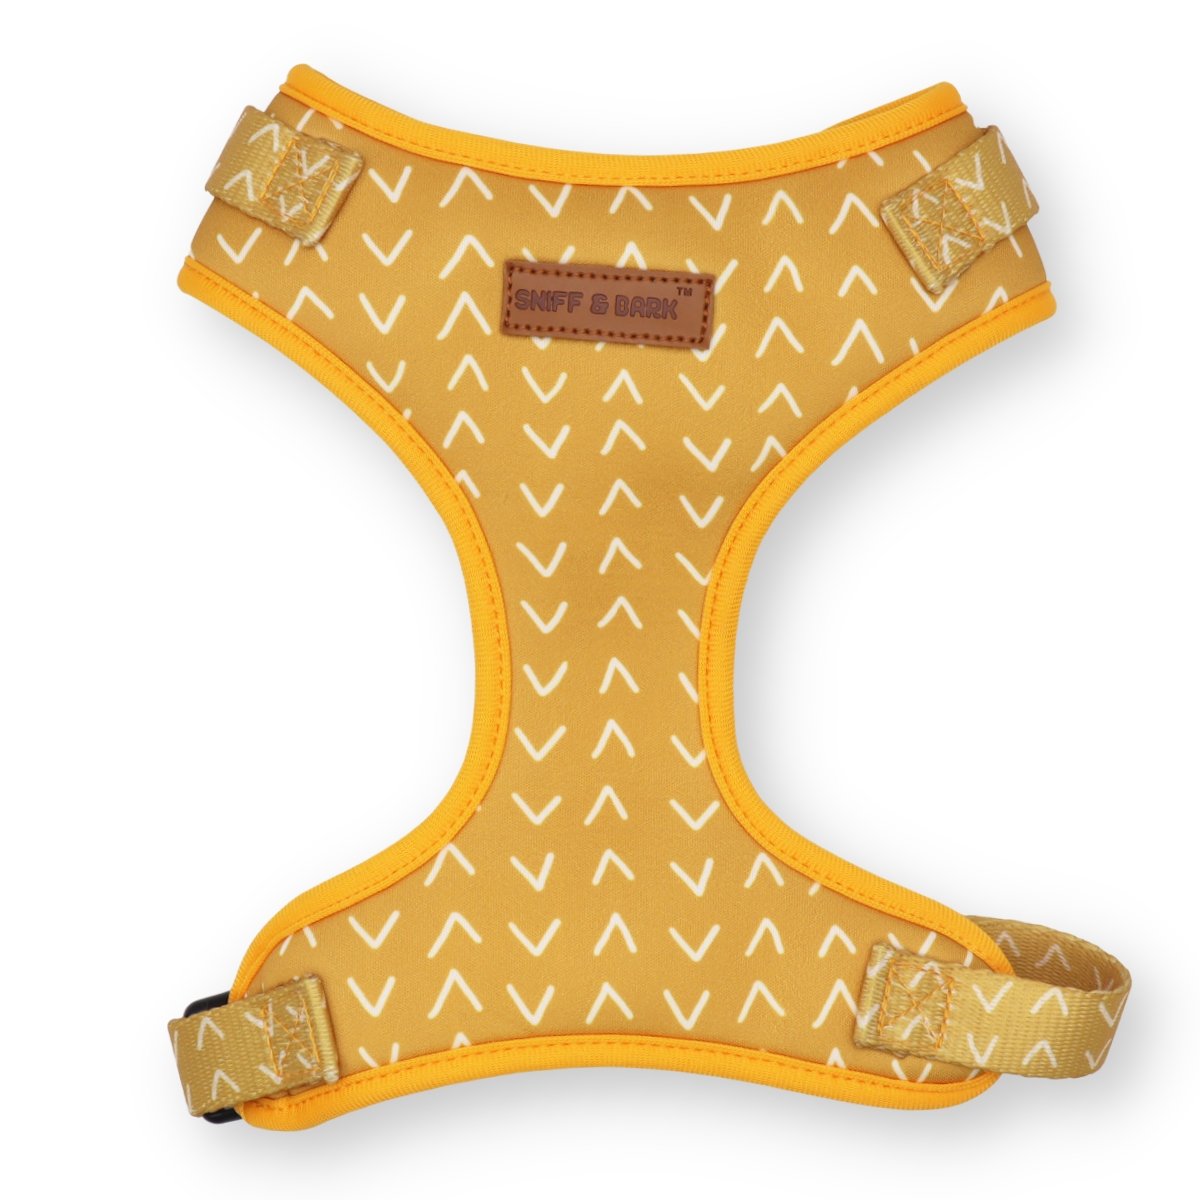 best dog harness for medium dogs - yellow color harness for dogs boys and girls